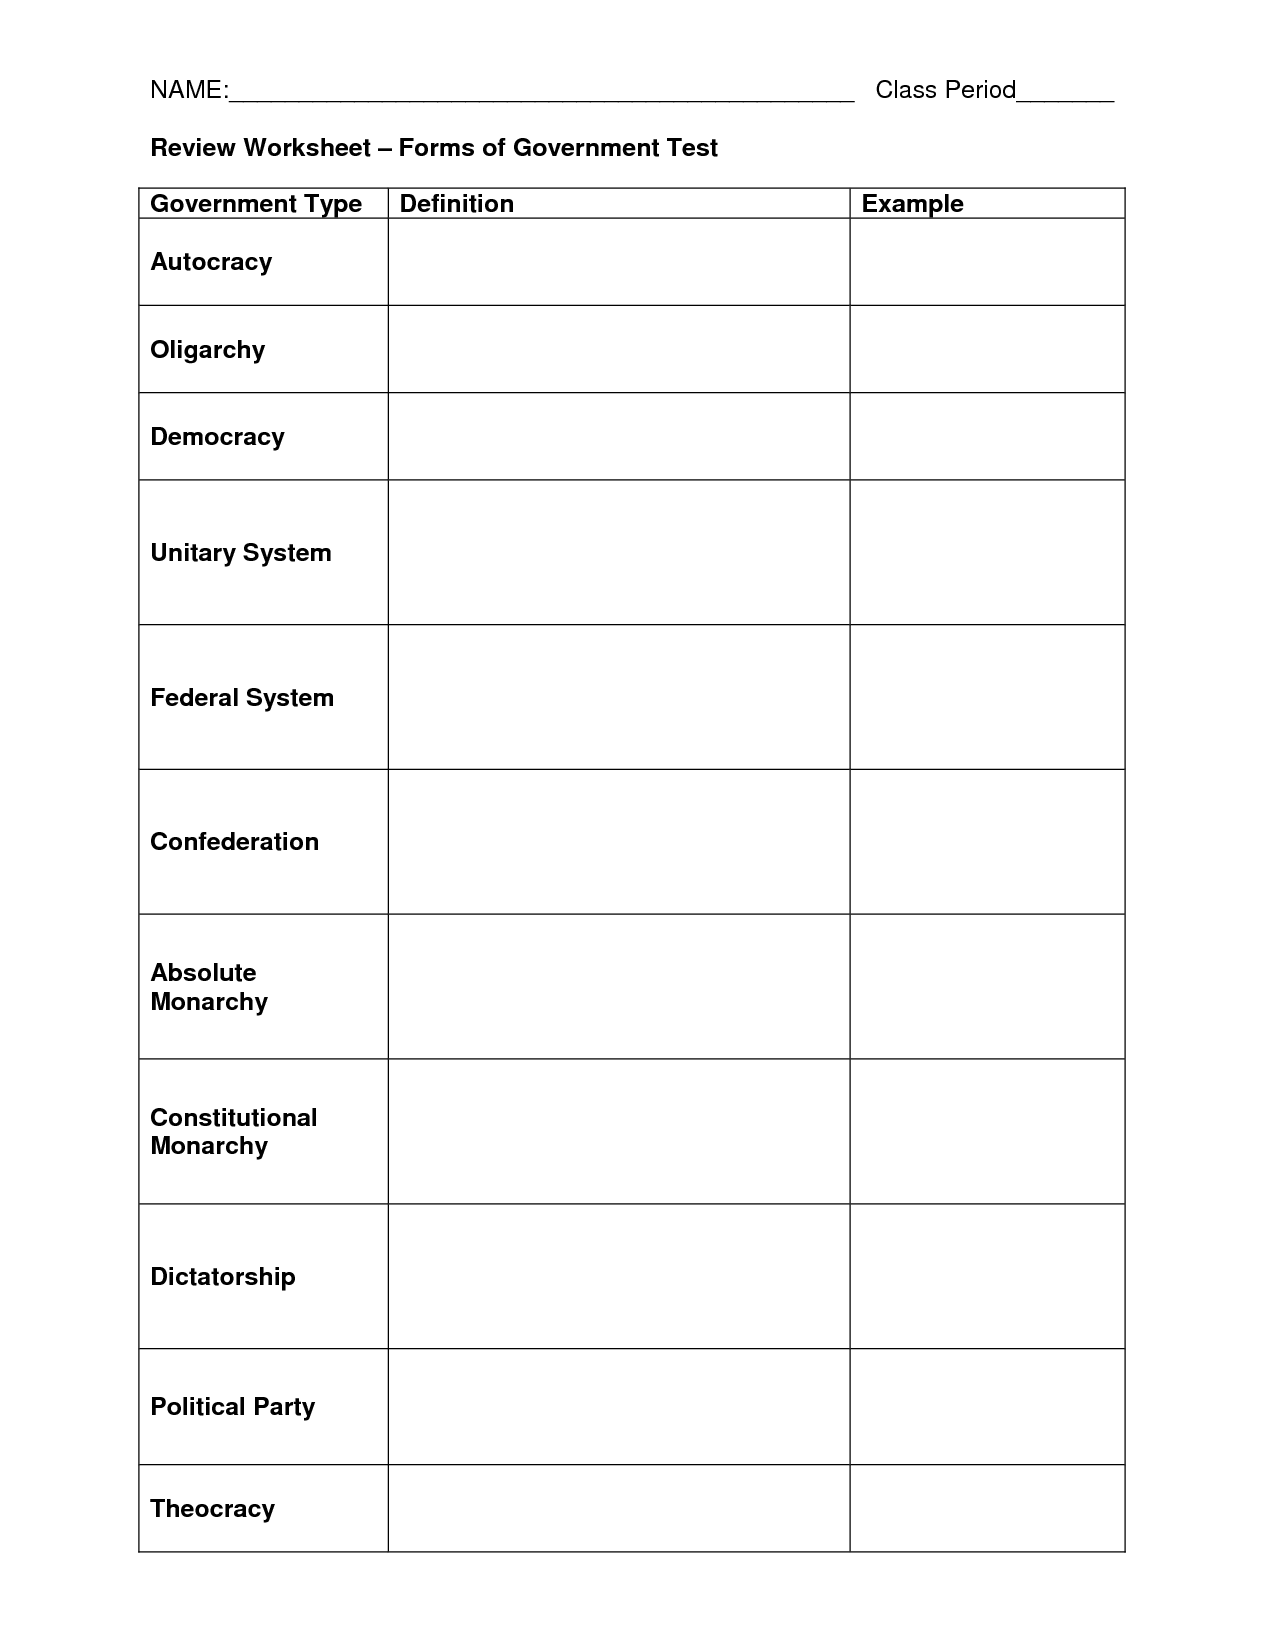 Government Branches Worksheets Image